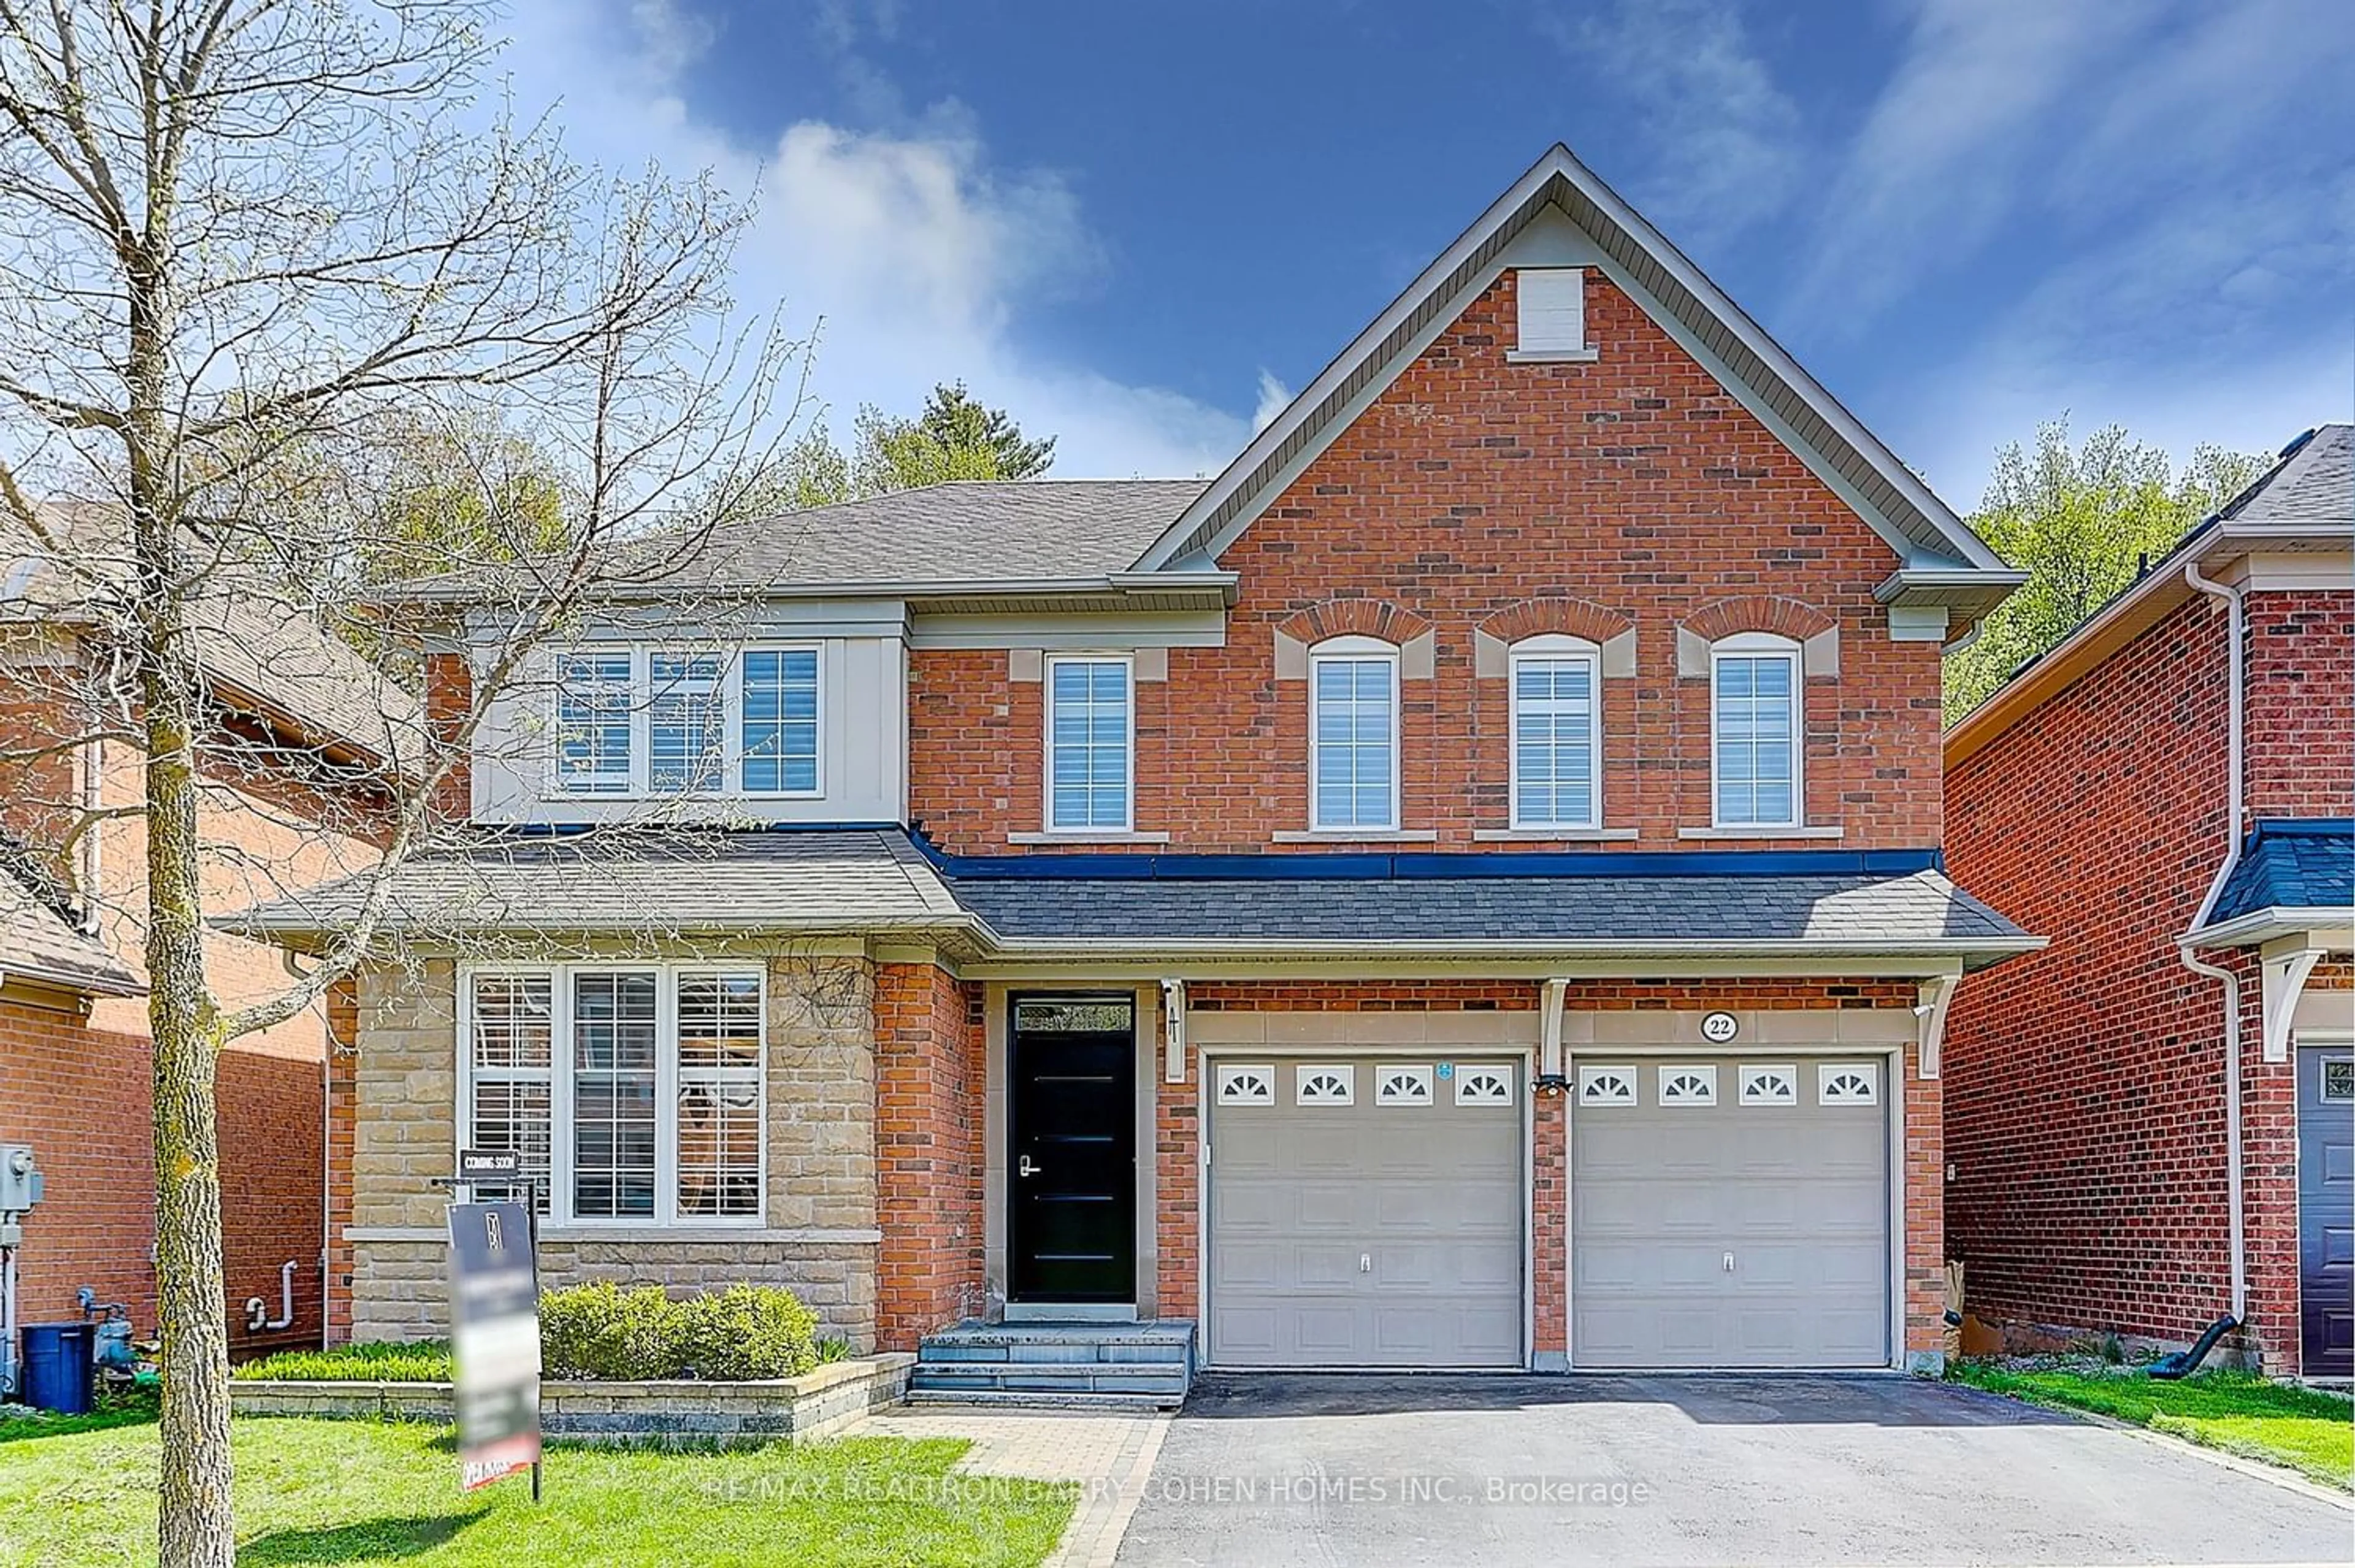 Home with brick exterior material for 22 Skywood Dr, Richmond Hill Ontario L4E 4L2